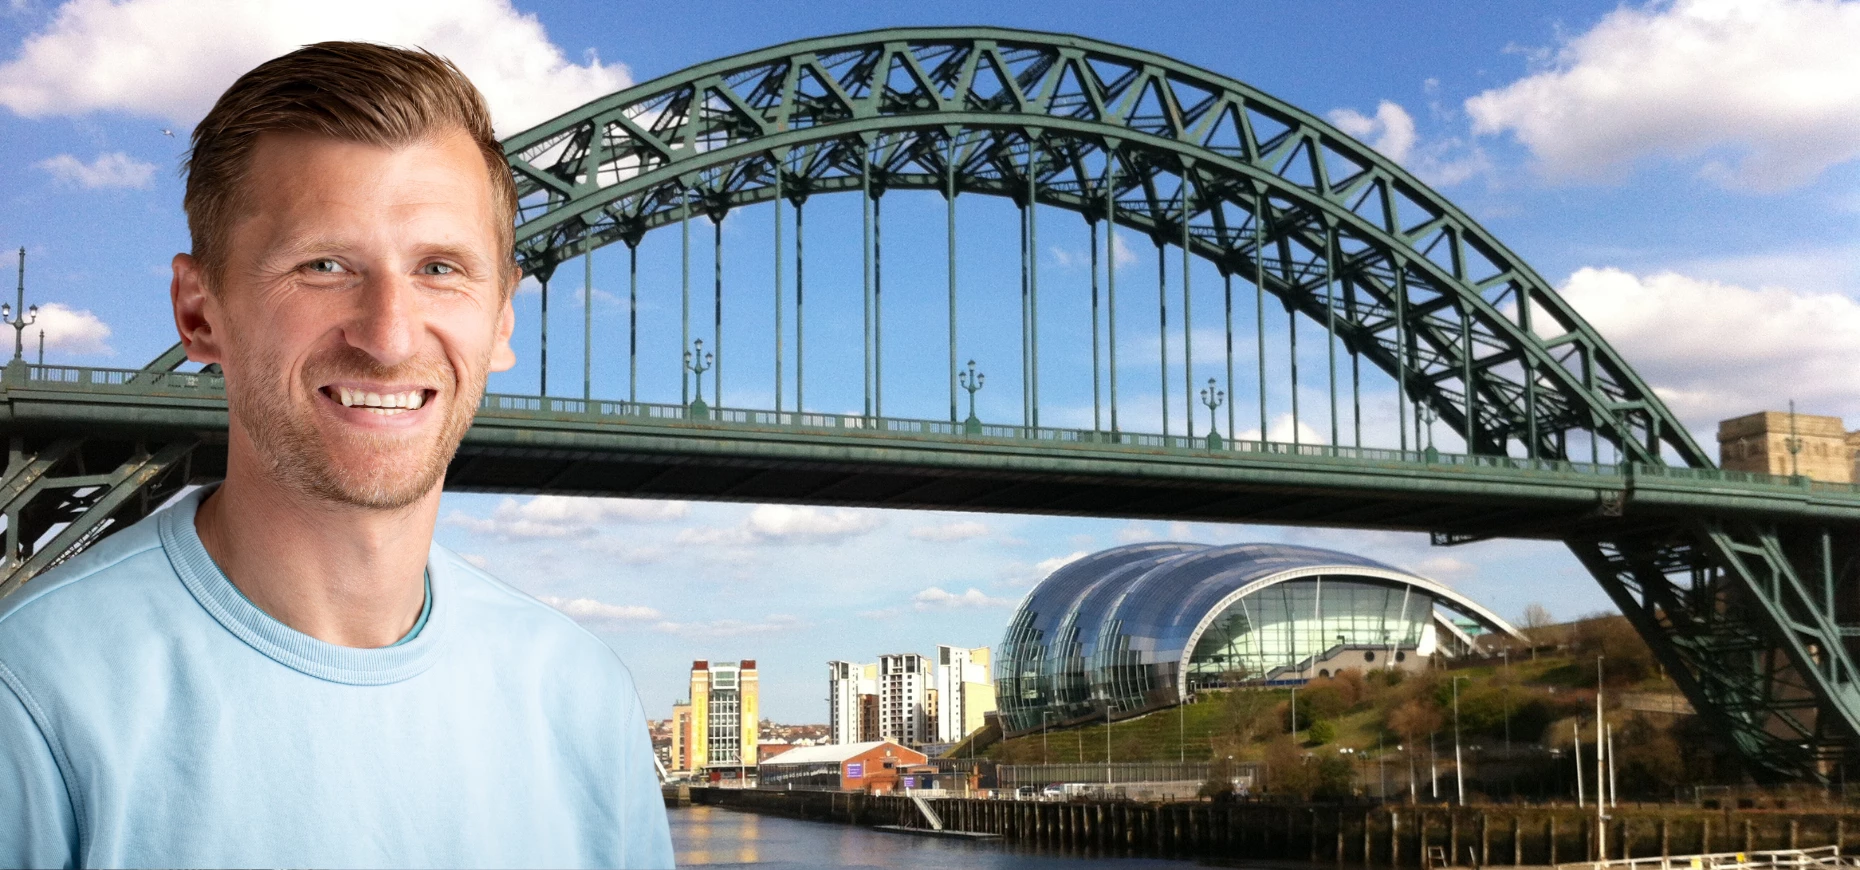 Dr Phill Bell, CEO of ART Health Solutions, pictured against the Tyne River.